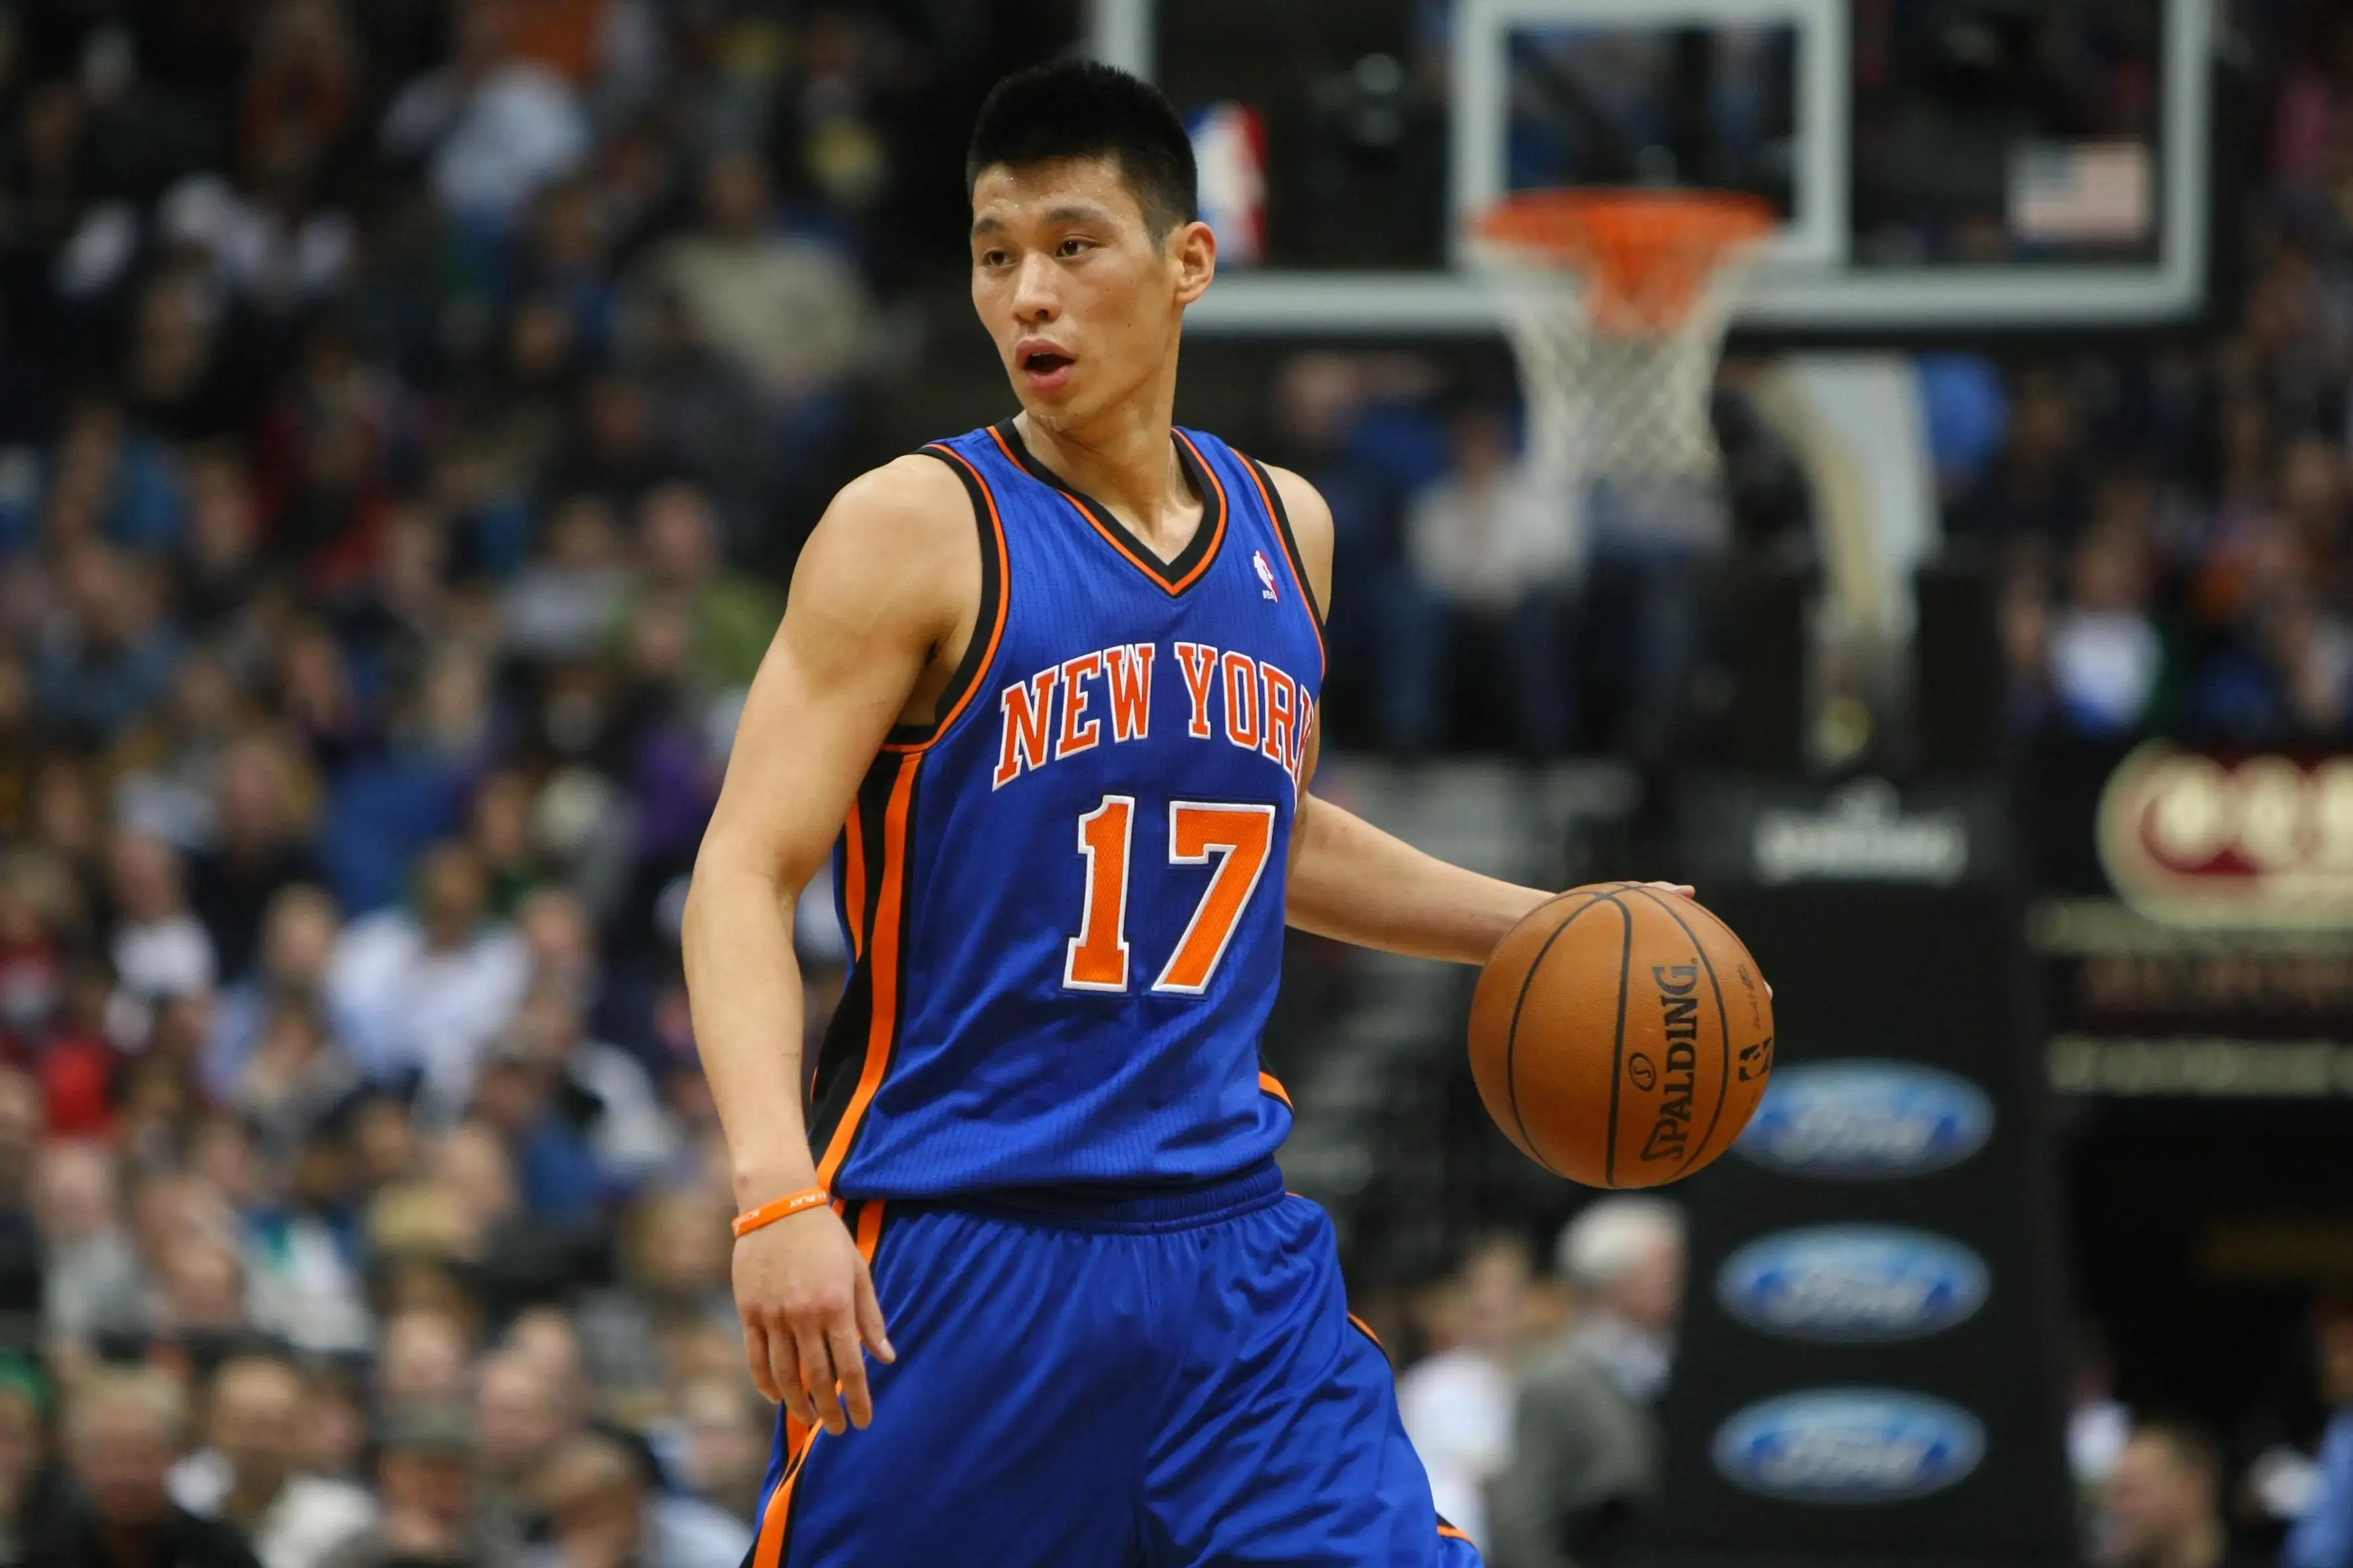 New York Knicks guard Jeremy Lin (17) against the Minnesota Timberwolves at the Target Center. The Knicks defeated the Timberwolves 100-98. / Brace Hemmelgarn-USA TODAY Sports